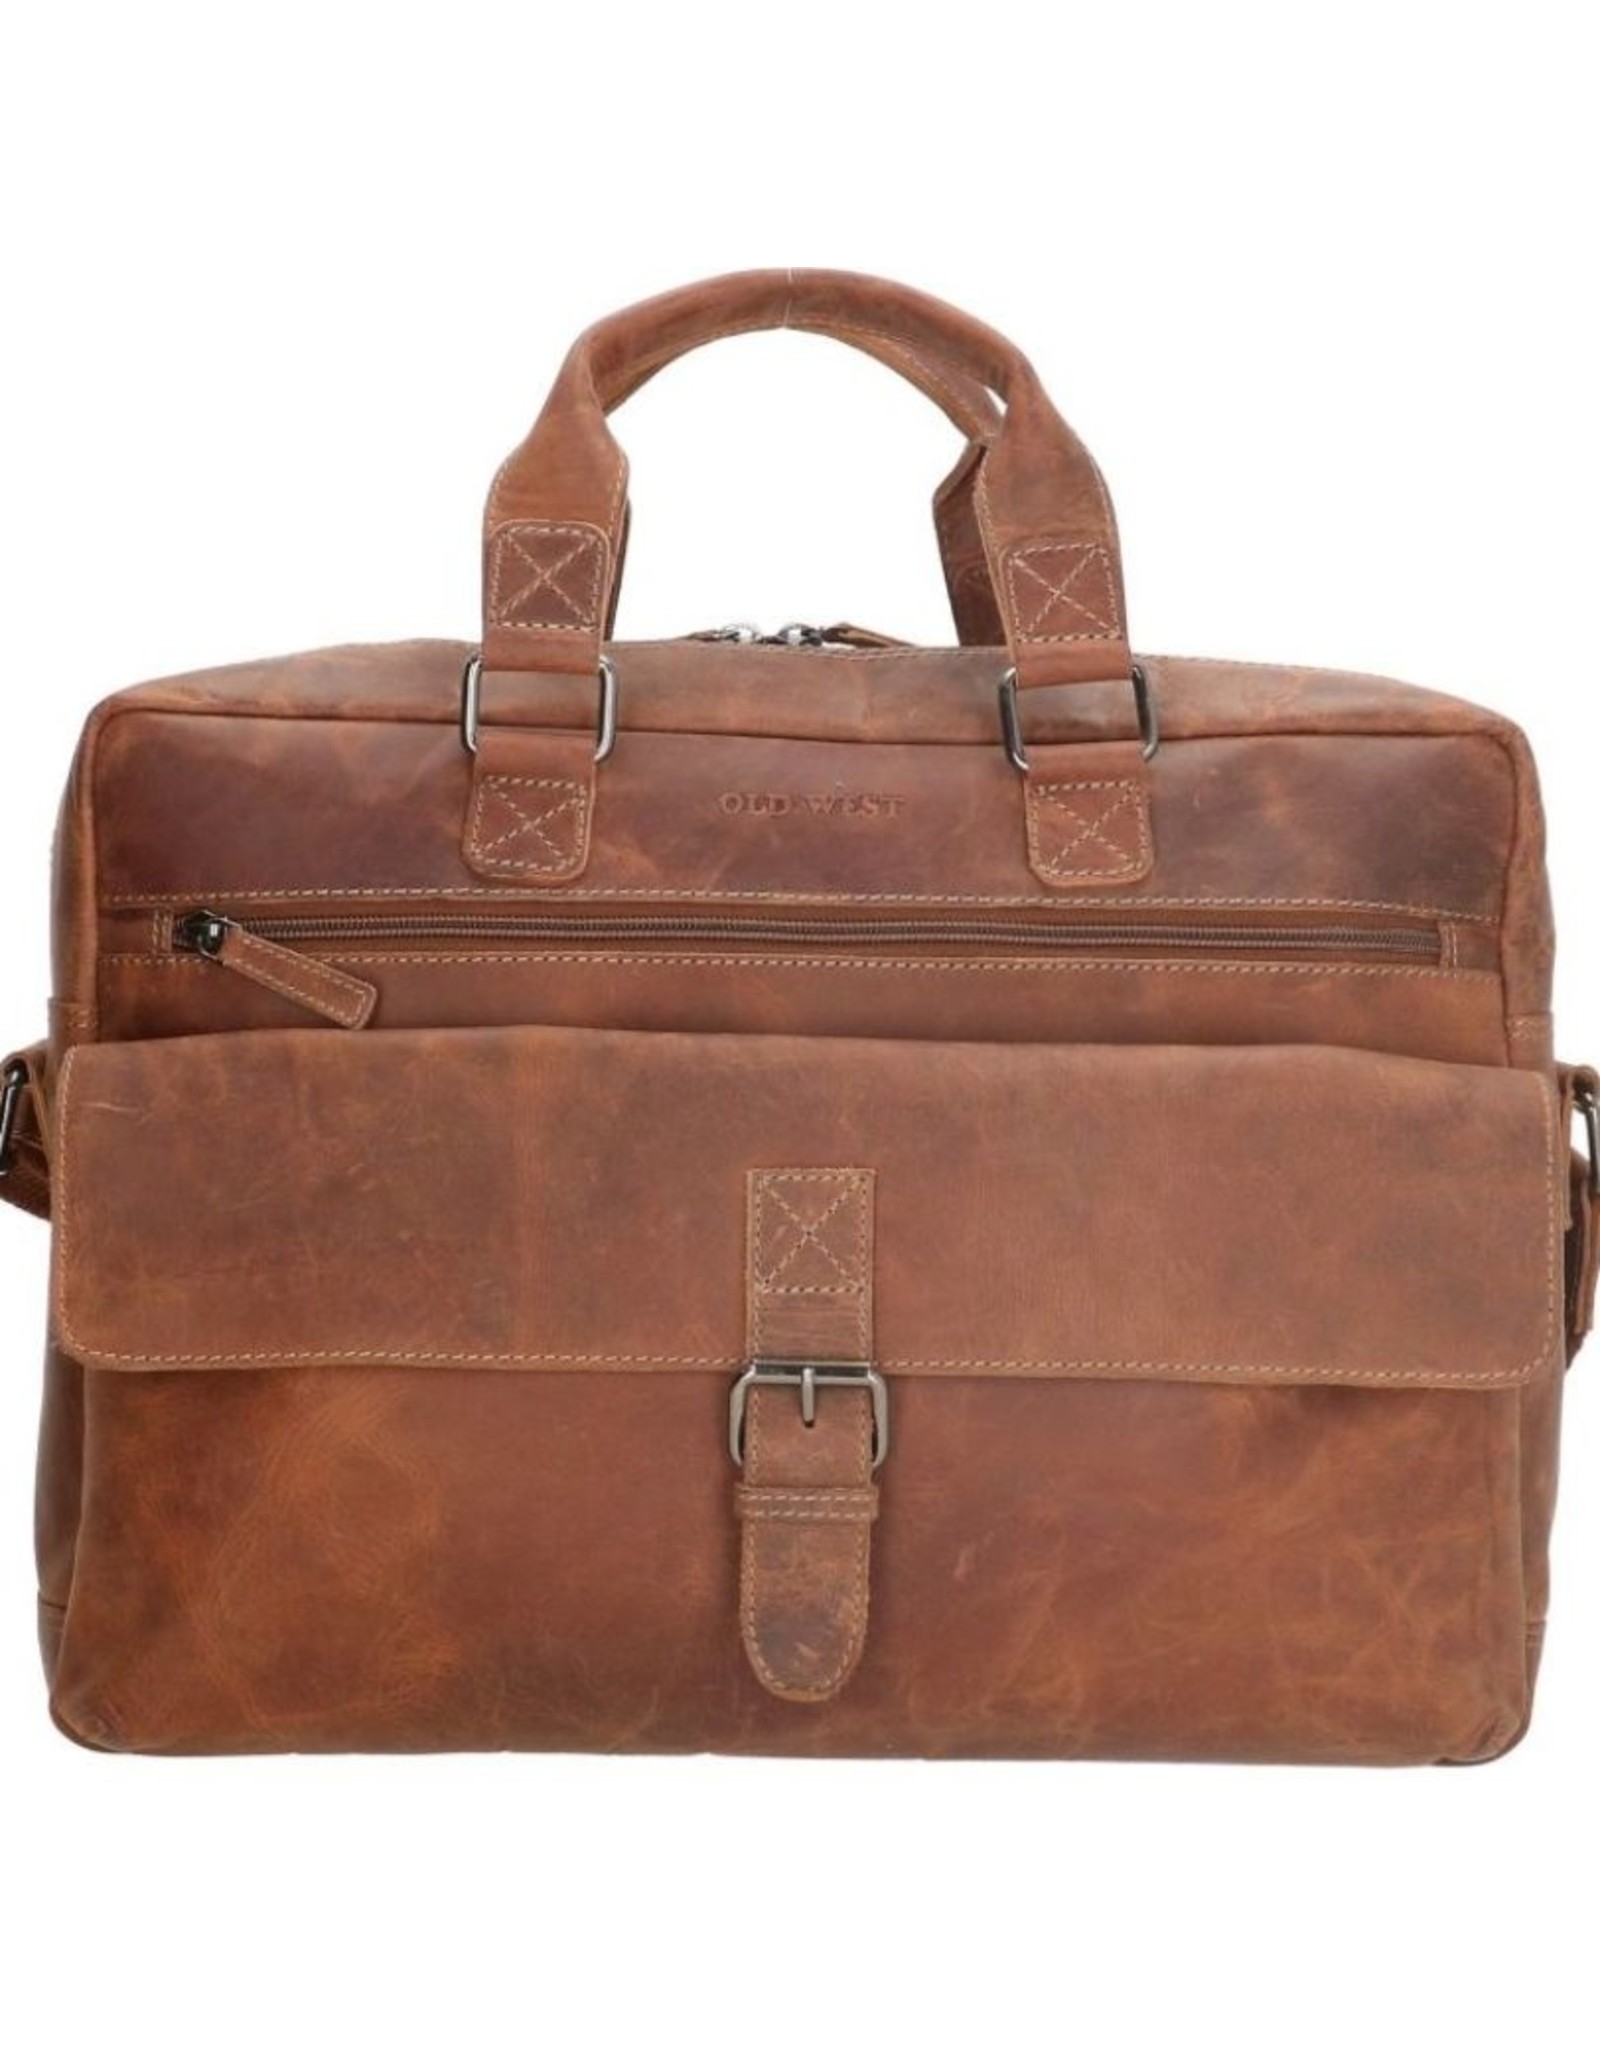 Old West Leather laptop bags - Laptop bag Old West 15,6" tanned leather  (camel)